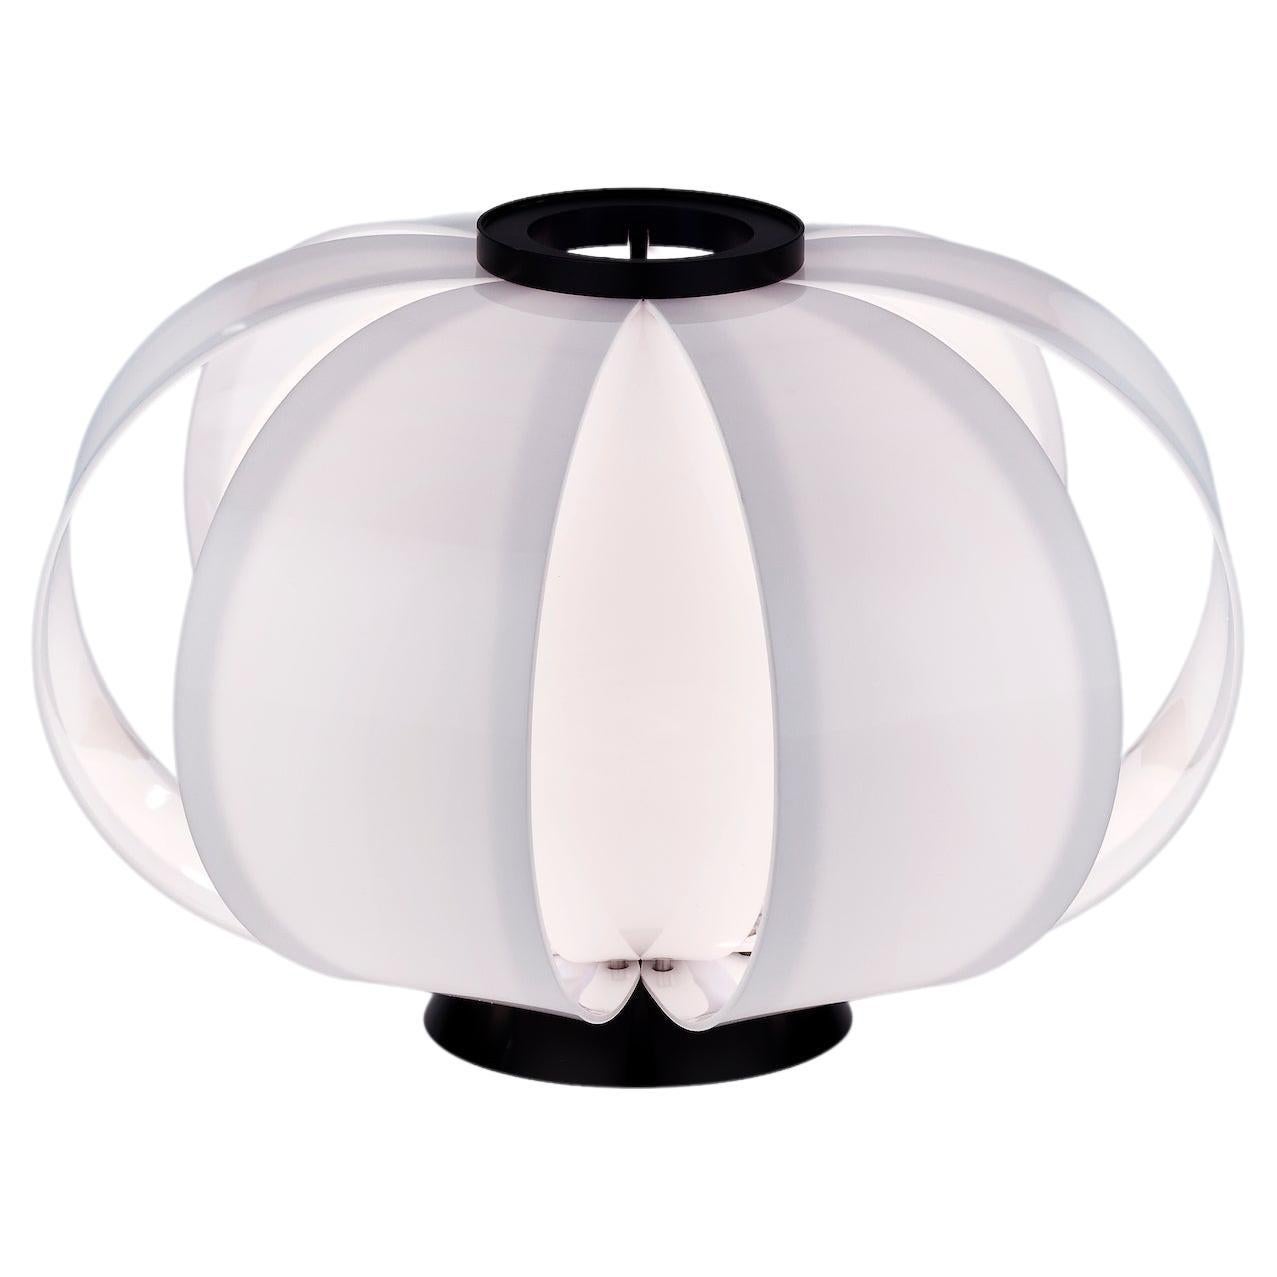 J.A. Coderch 'Disa Mini' Table Lamp in White for Tunds